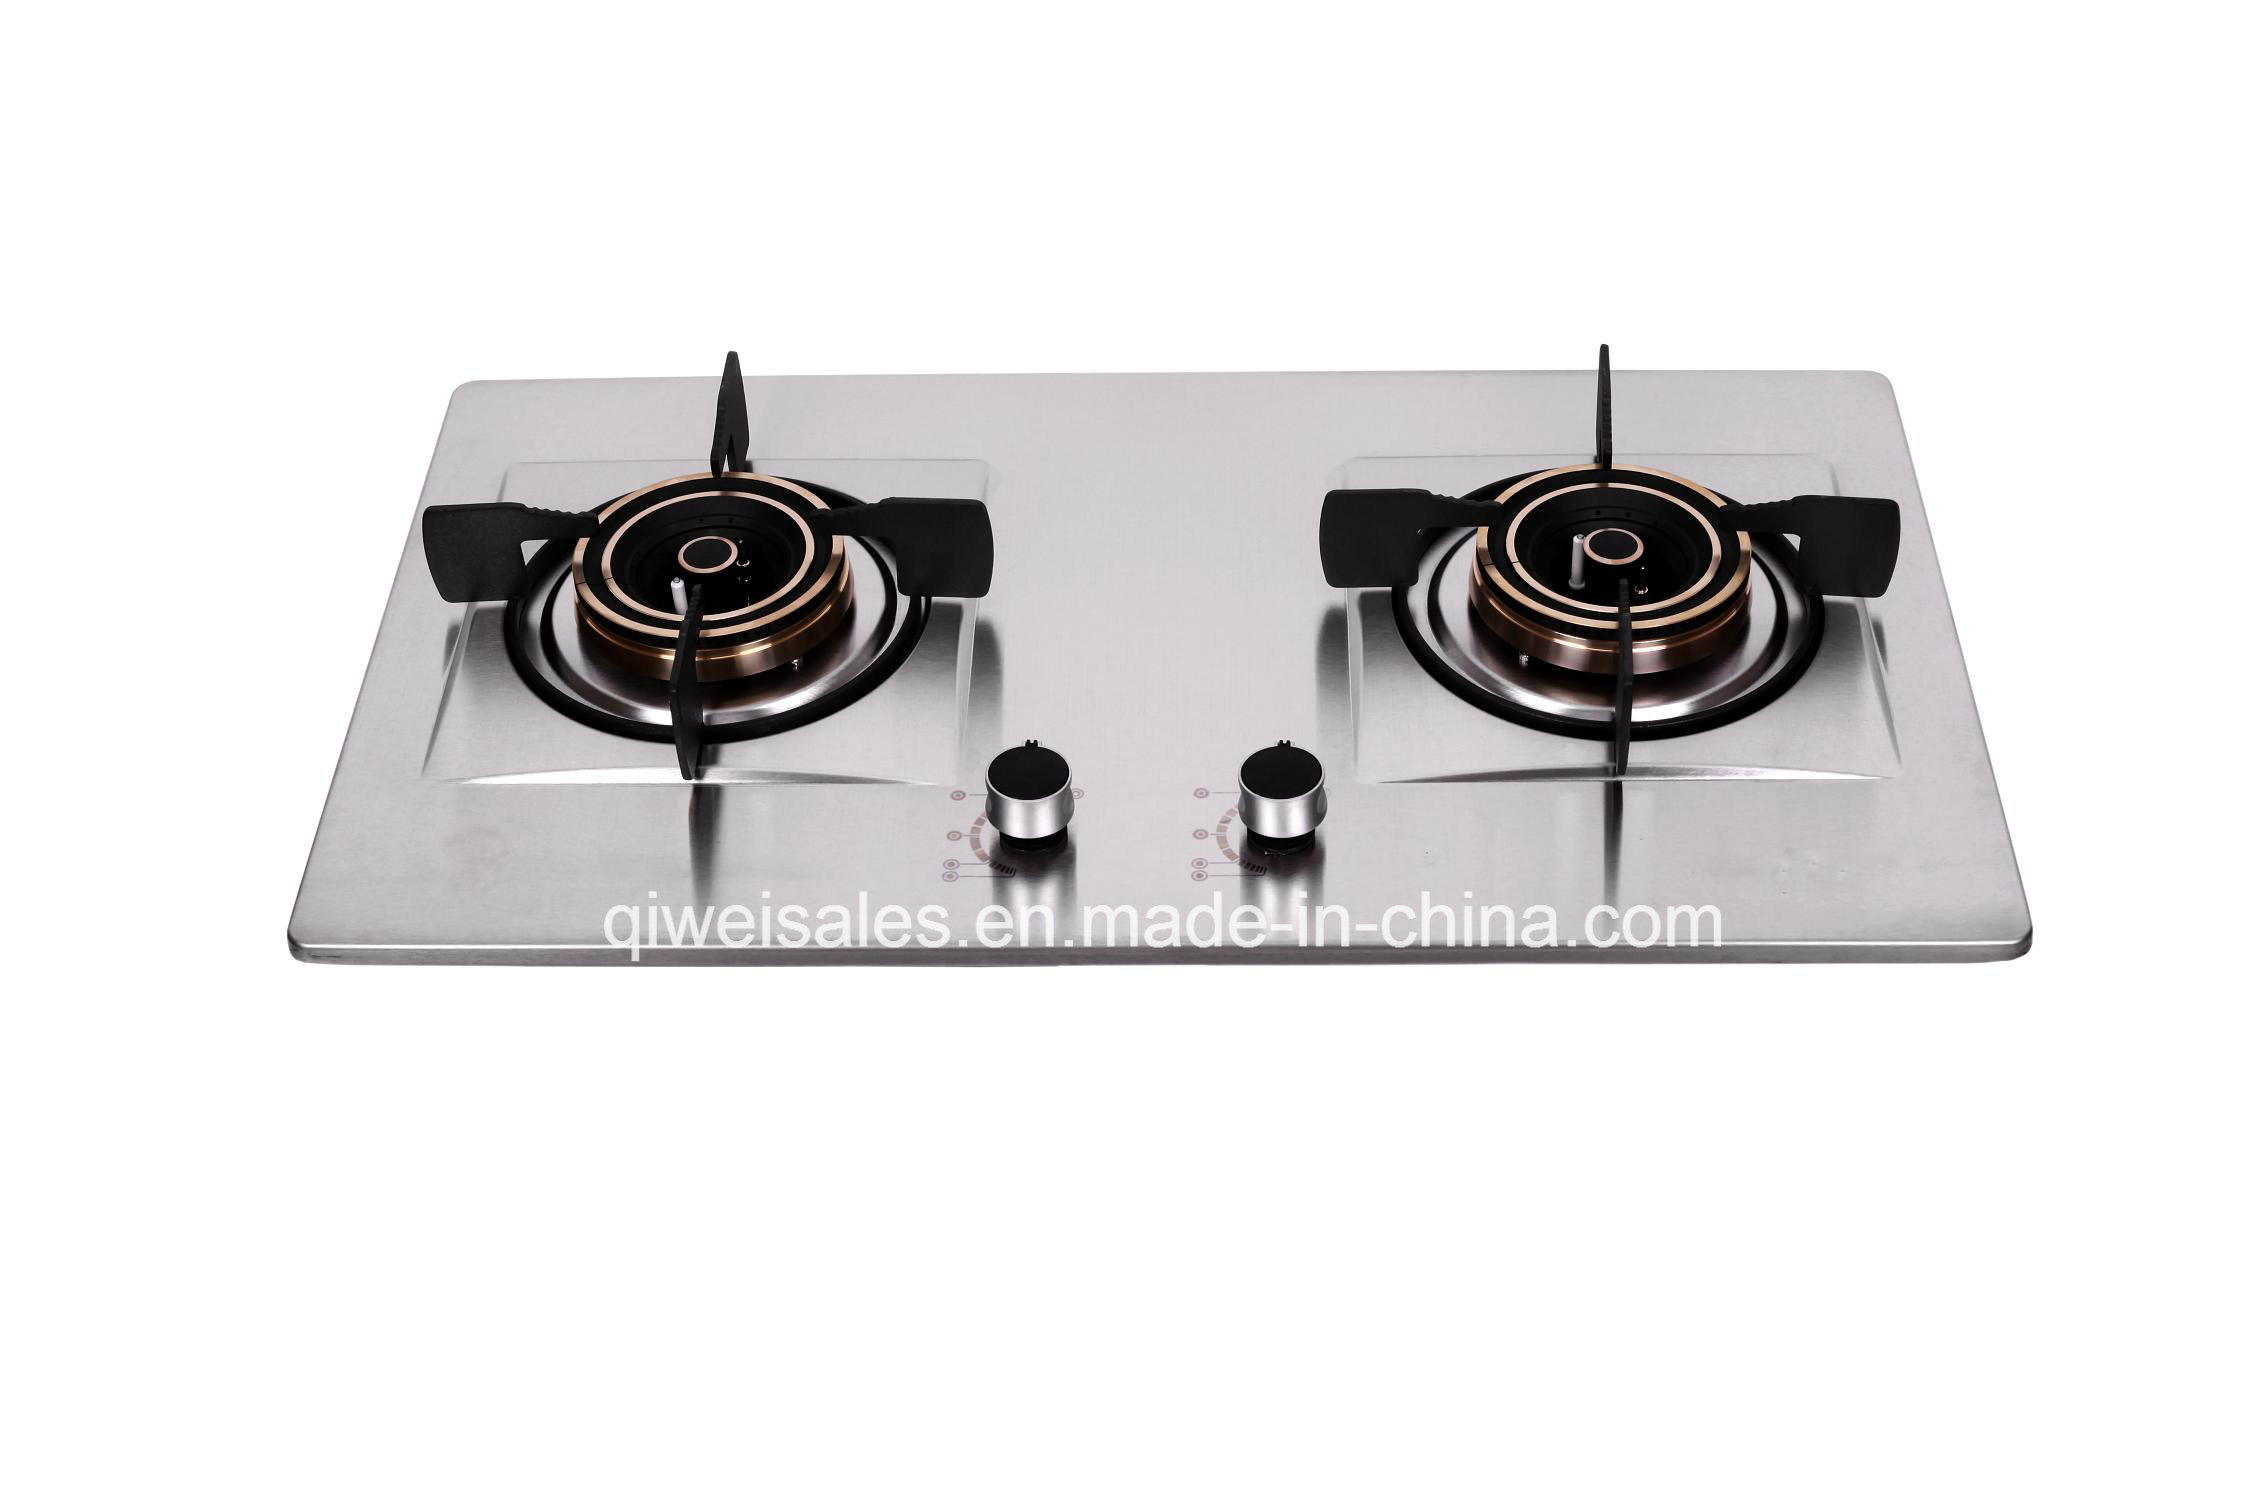 Gas Stove with 2 Burners (QW-SZ8005)